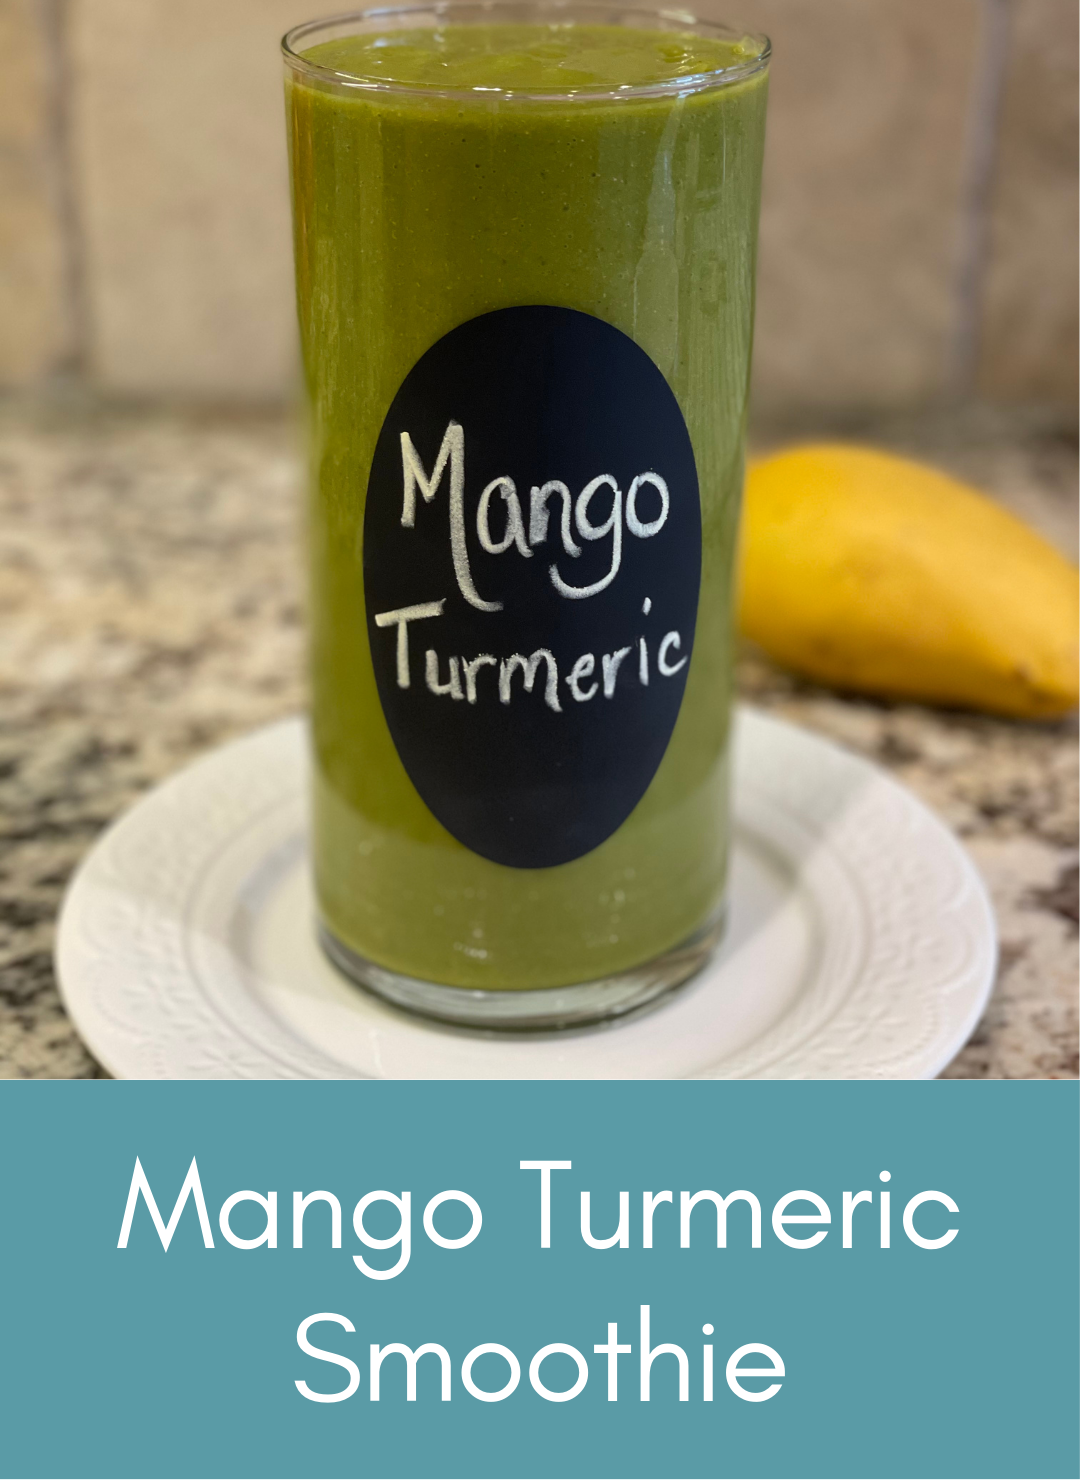 Mango turmeric plant based whole food vegan smoothie Picture with link to recipe